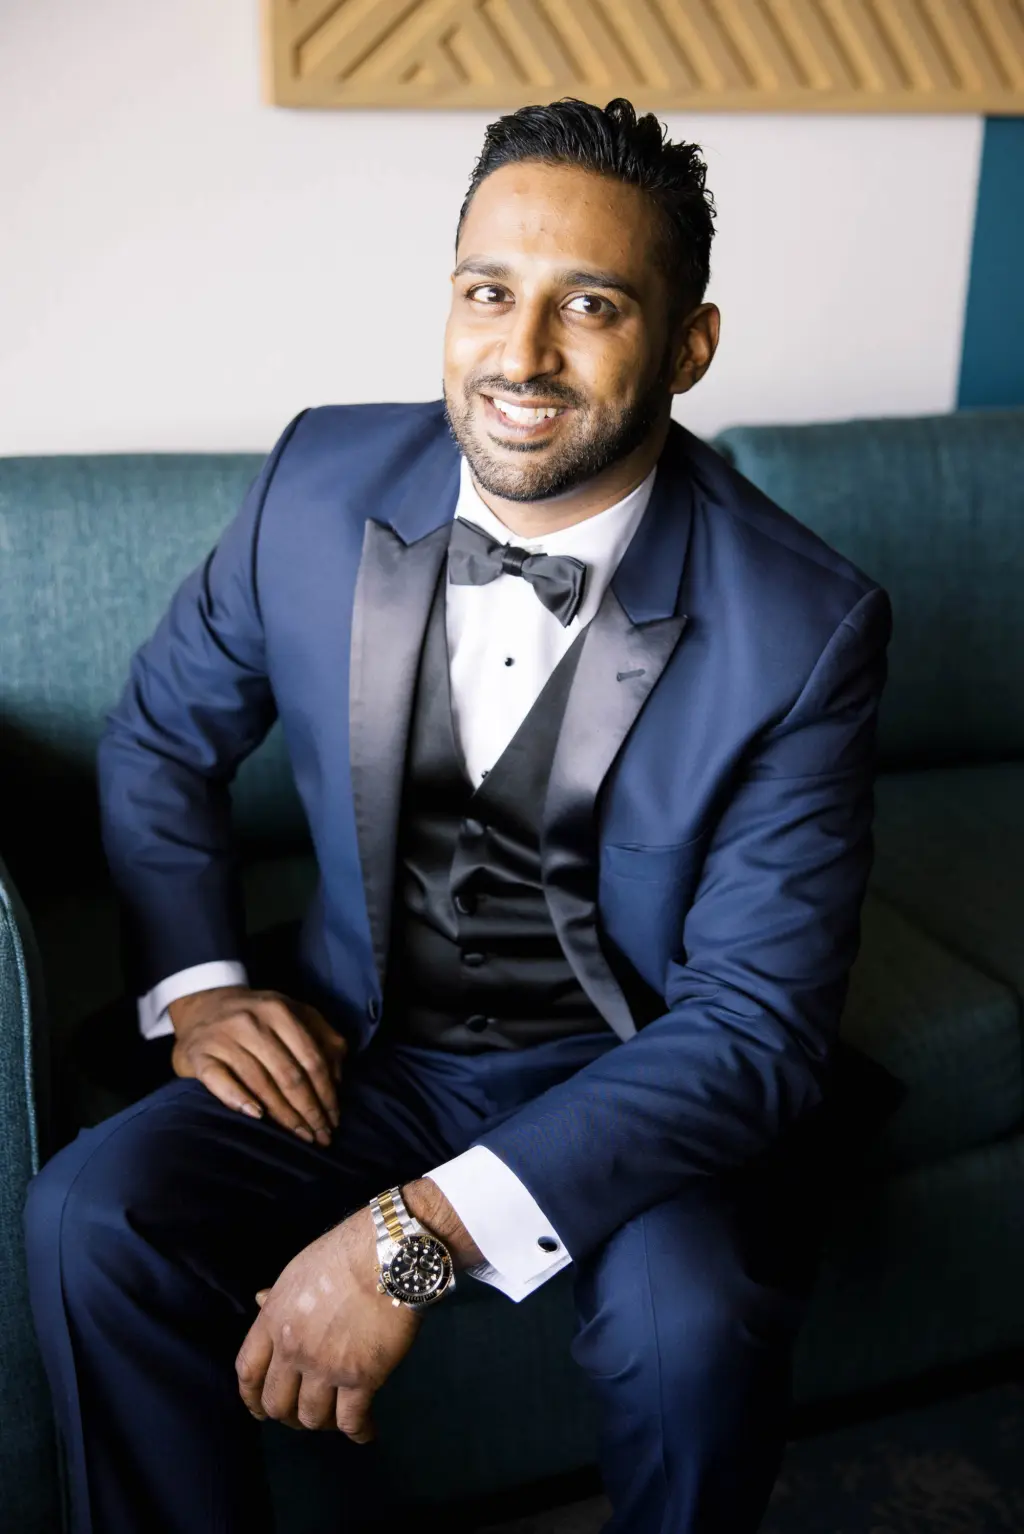 Groom's Navy Wedding Tuxedo with Black Lapels | Three Piece Suit with Bowtie Inspiration